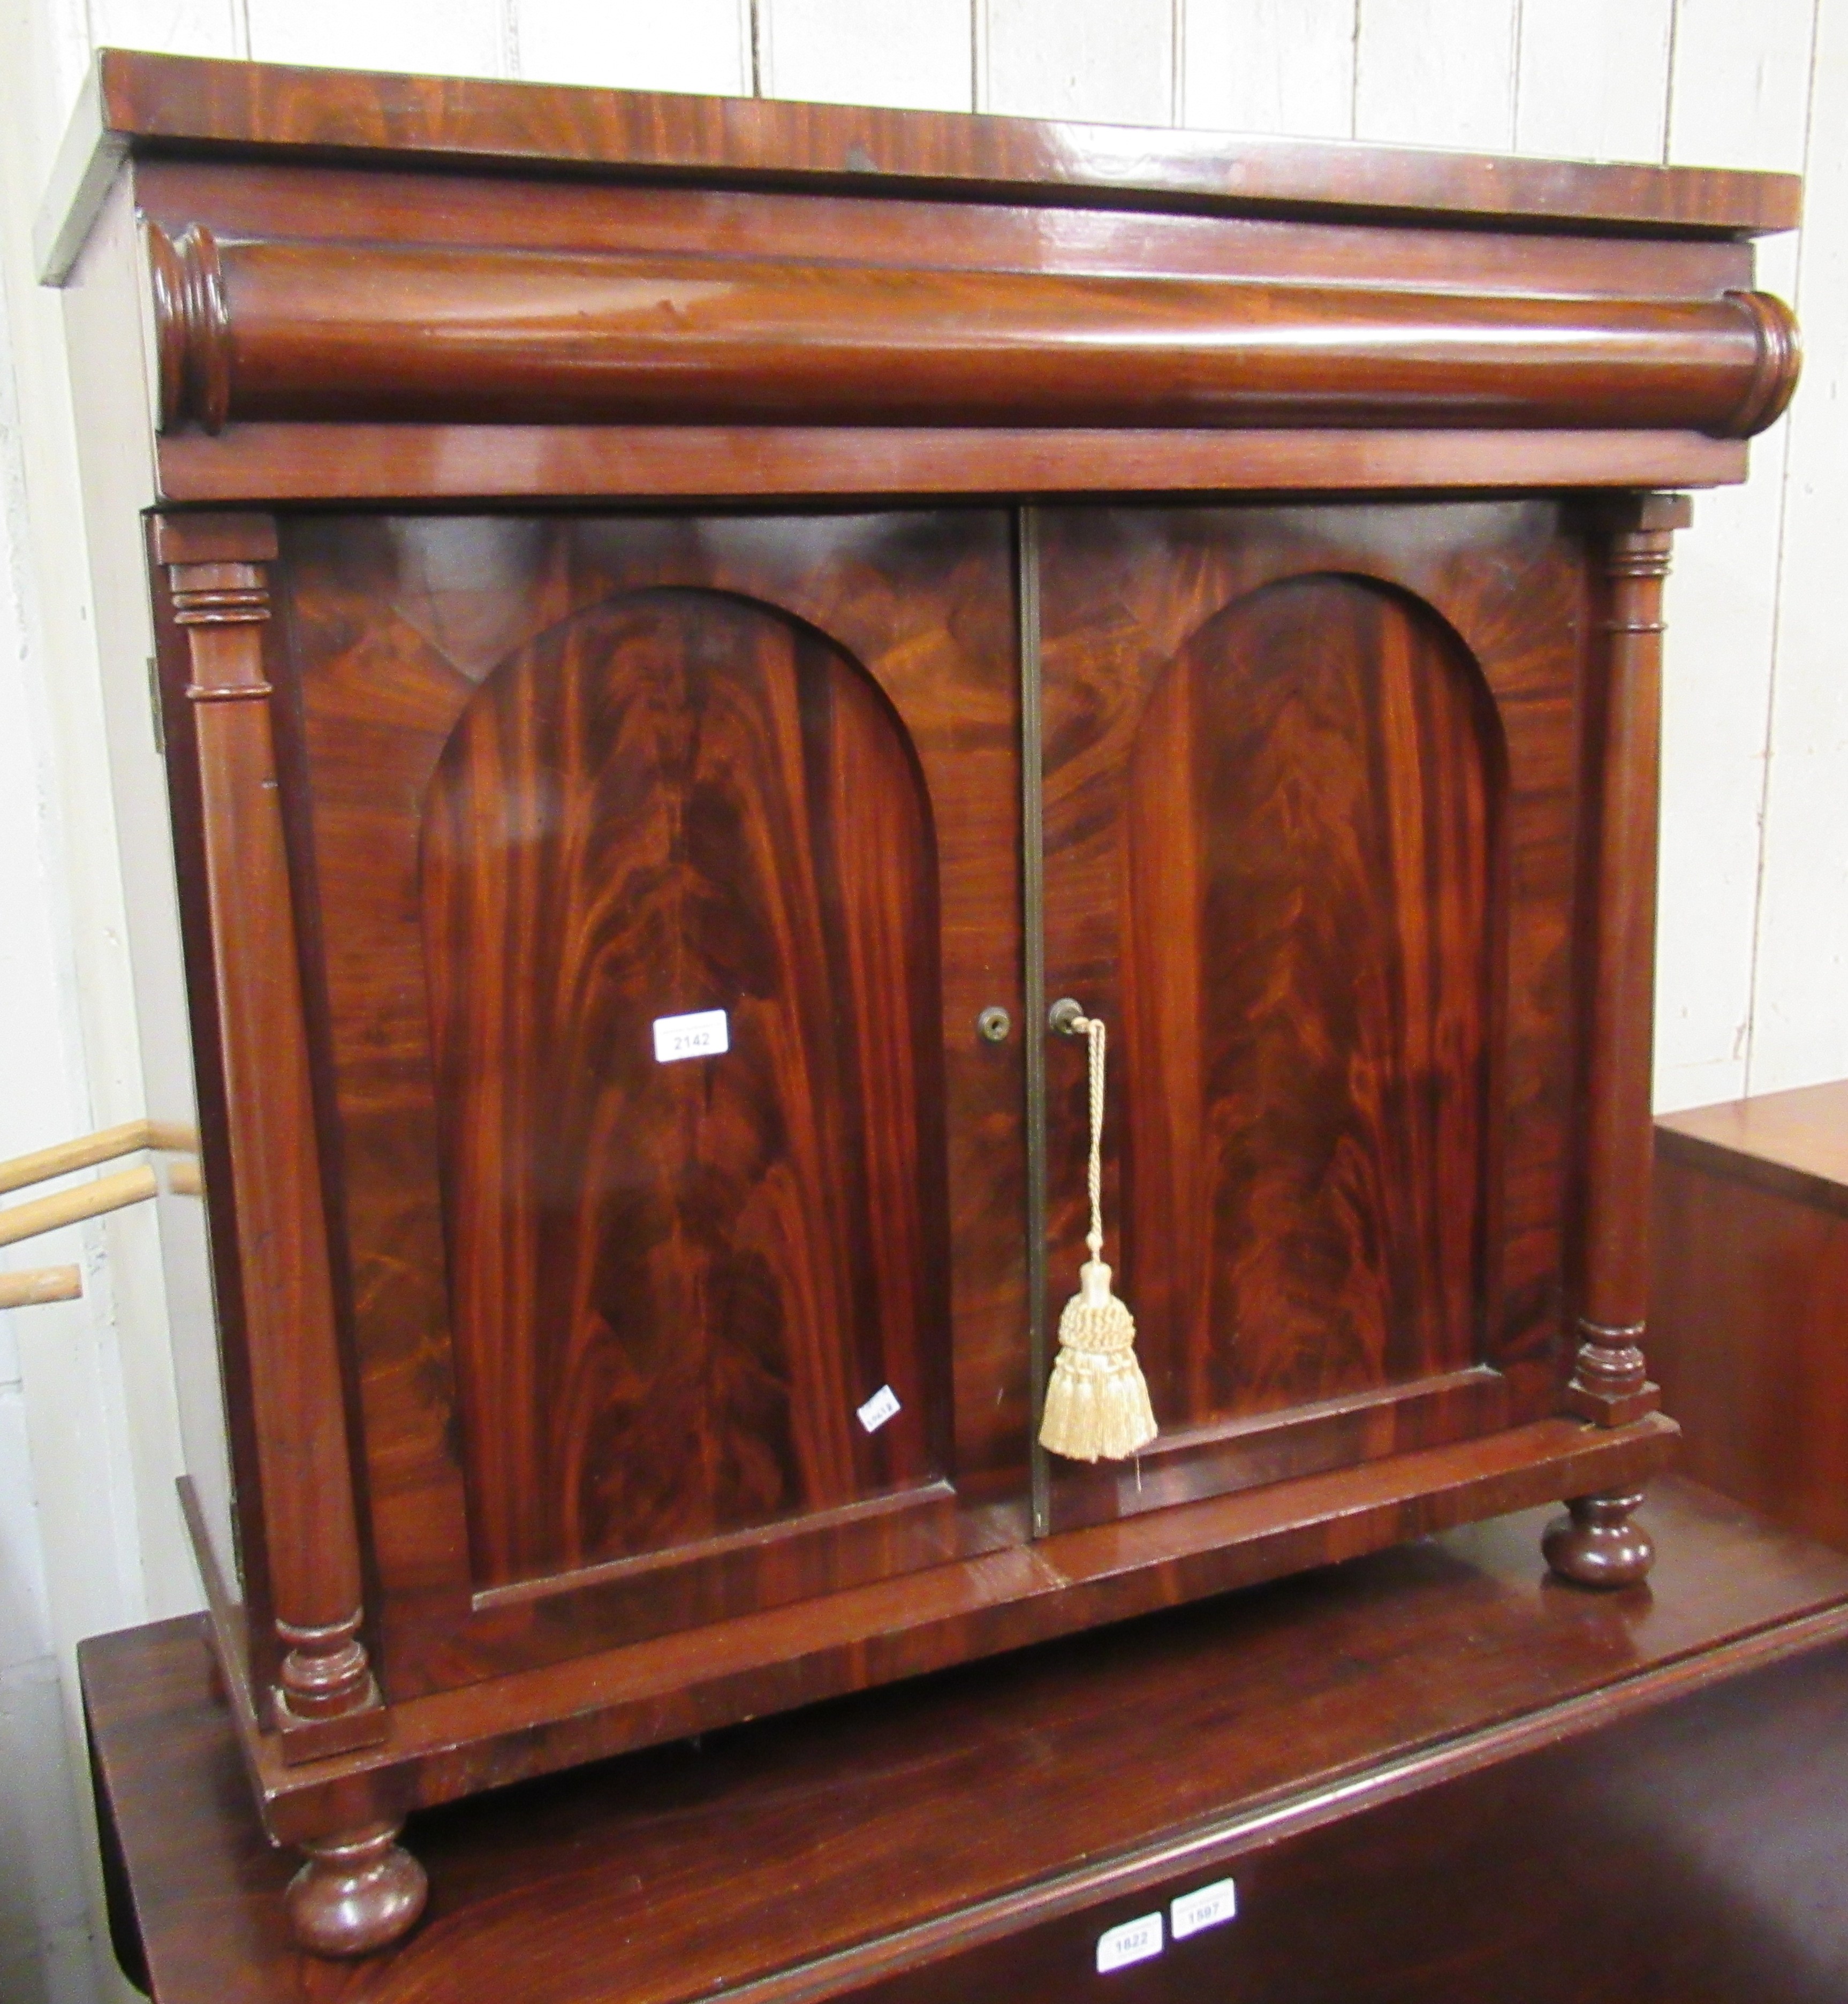 William IV mahogany side cabinet having single moulded drawer above two arch top panelled doors on